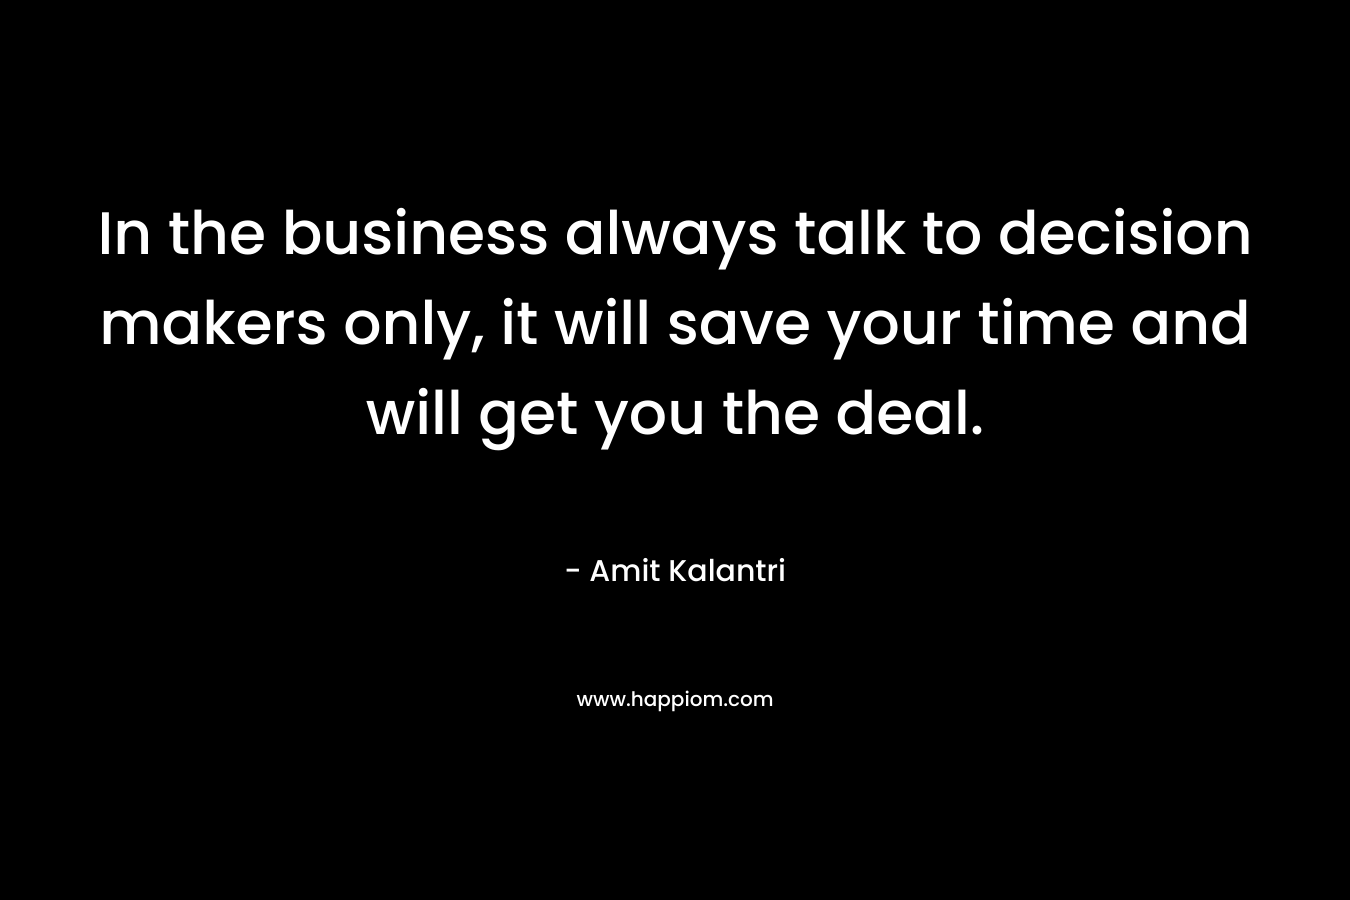 In the business always talk to decision makers only, it will save your time and will get you the deal.